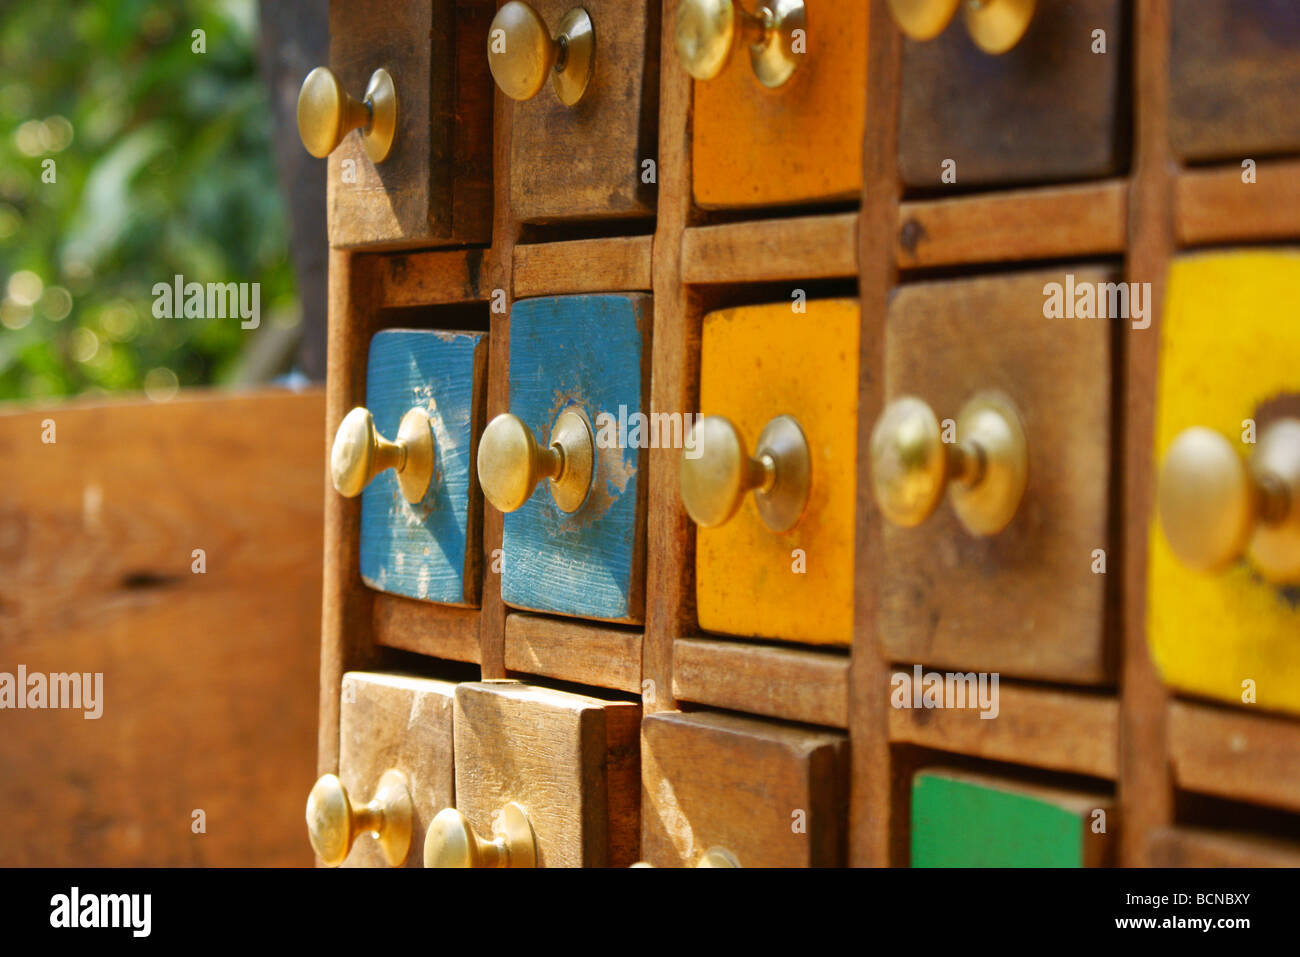 Colored spice cabinet from South East Asia Stock Photo